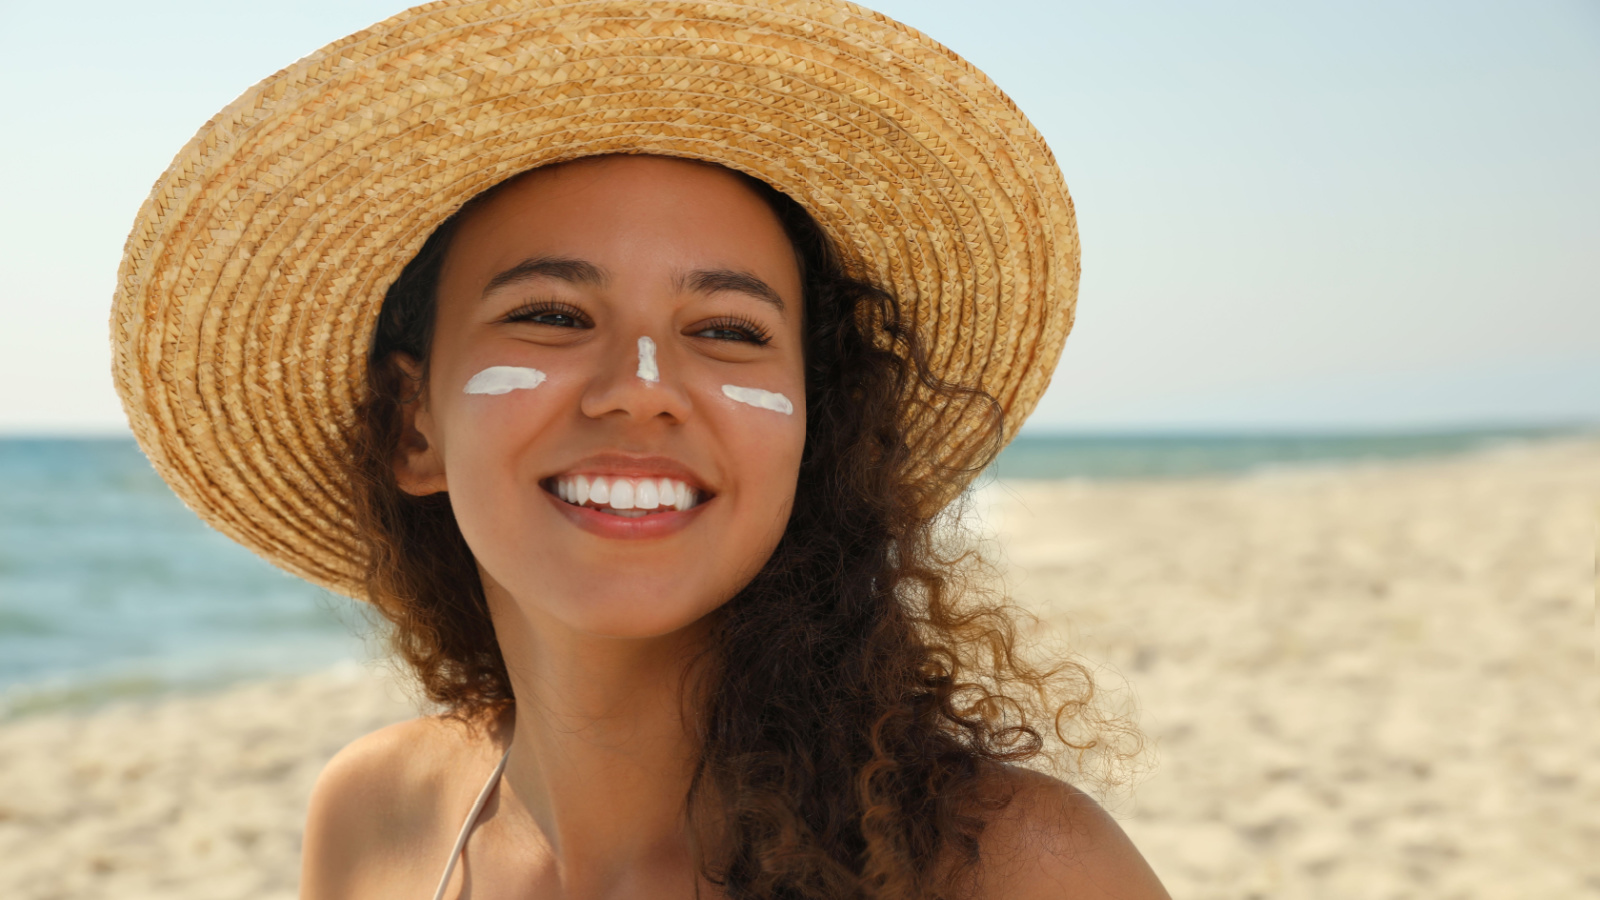 image credit: New Africa/Shutterstock <p><span>Your skin tells a story, often revealing secrets about your health. Regular skin checks, either self-exams or by a dermatologist, can detect early signs of skin cancer. It’s about spotting changes, no matter how small they seem. Early detection here can literally be a lifesaver.</span></p>